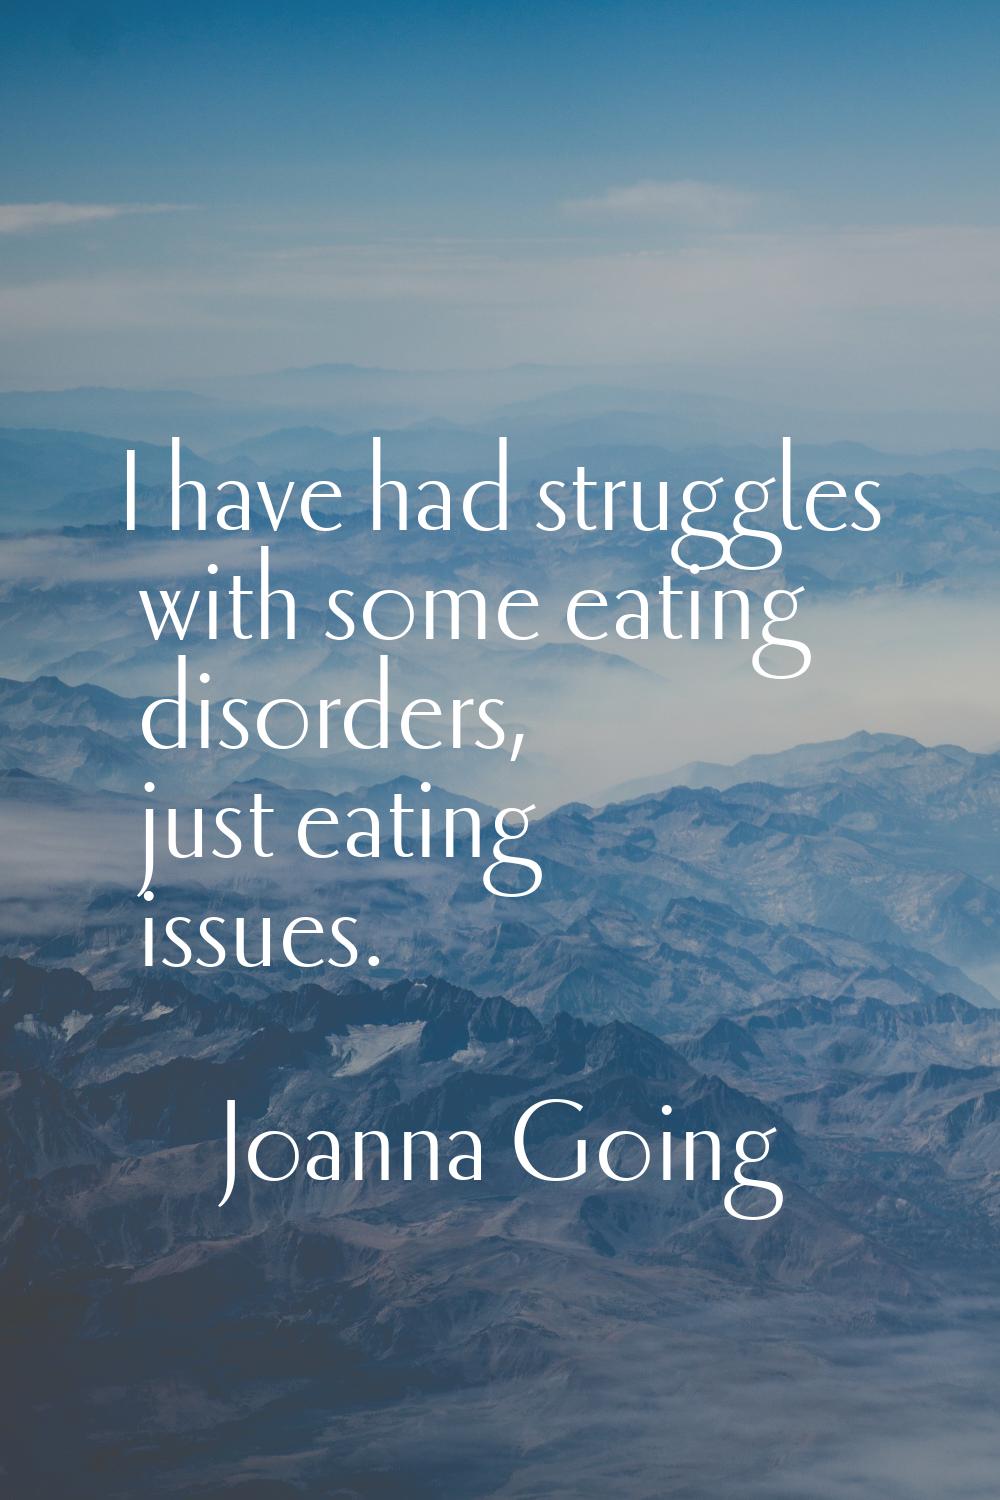 I have had struggles with some eating disorders, just eating issues.